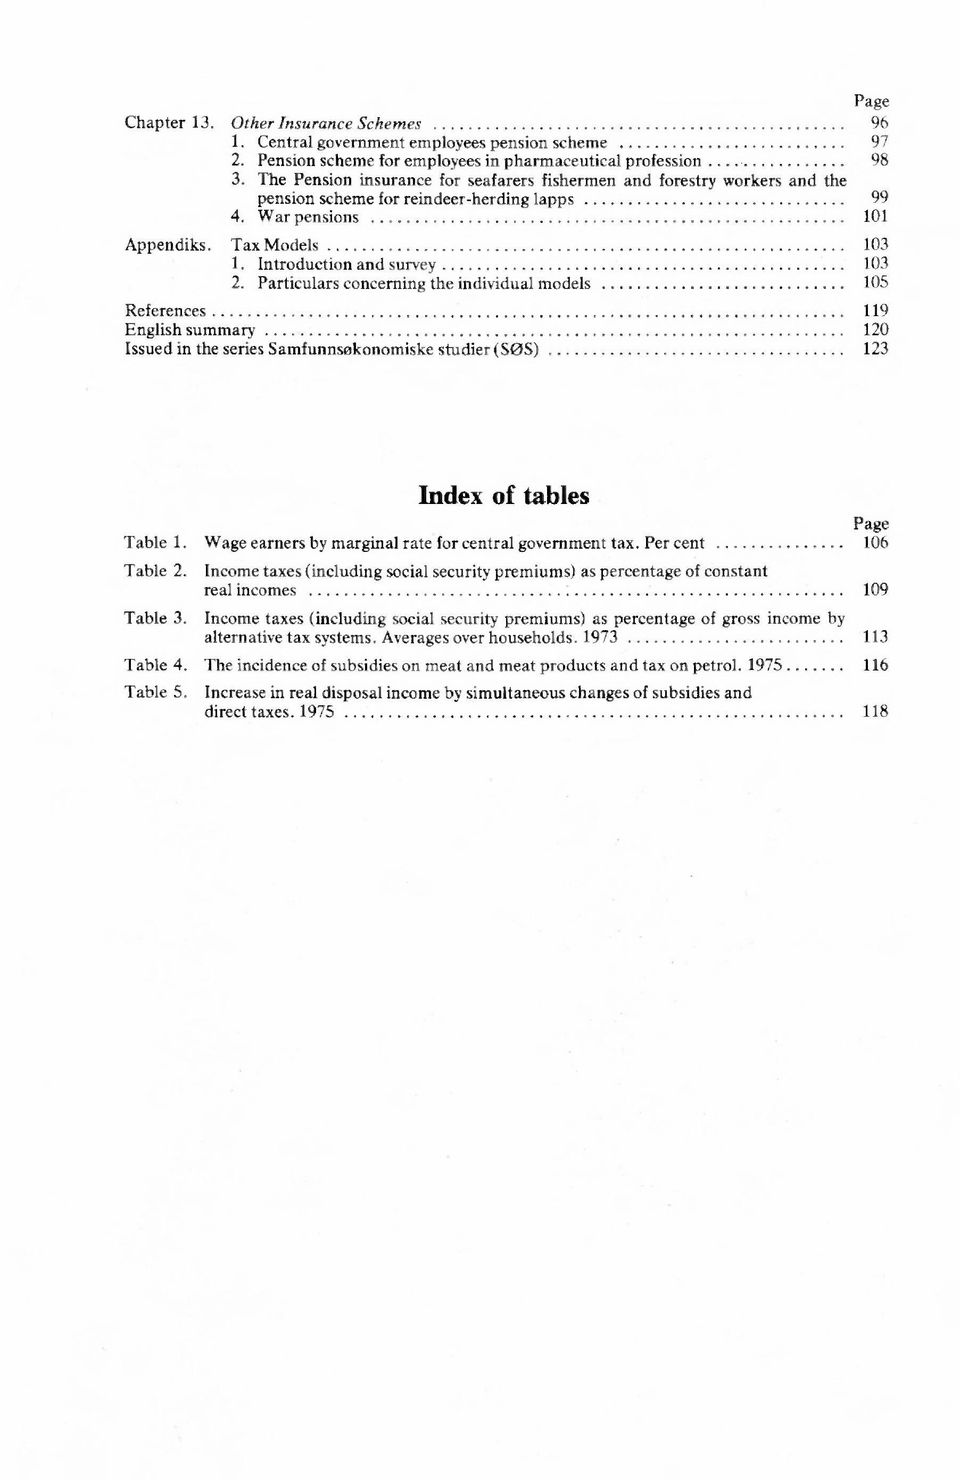 Particulars concerning the individual models 105 References 119 English summary 120 Issued in the series Samfunnsøkonomiske studier (SOS) 123 Index of tables Page Table 1.